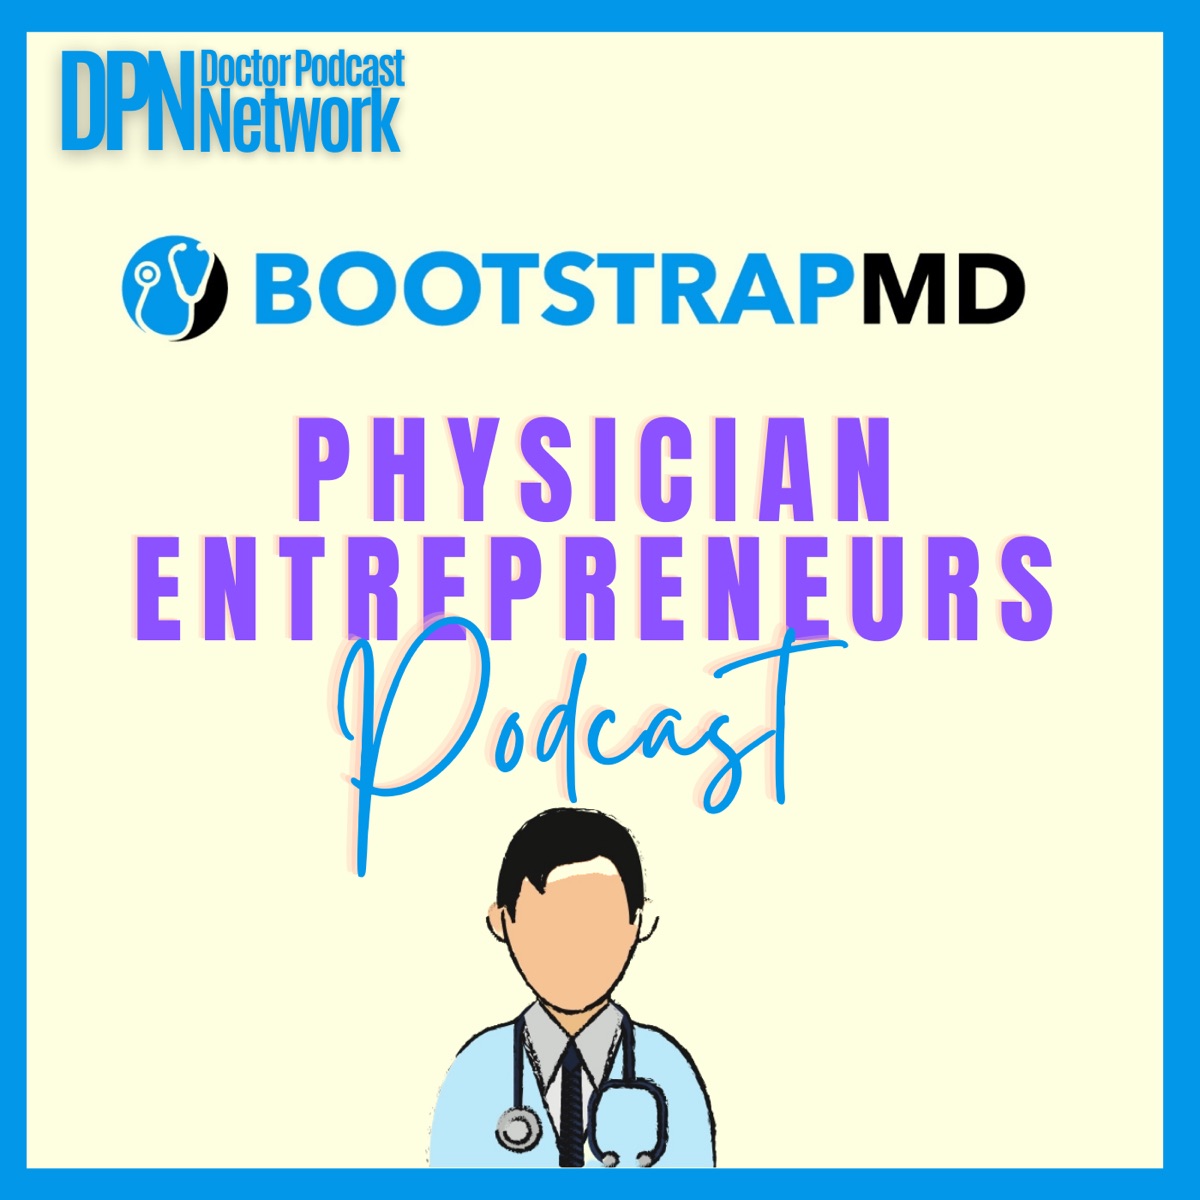 BootstrapMD - Physician Entrepreneurs Podcast Dr. Woo-Ming - Podcast Podtail